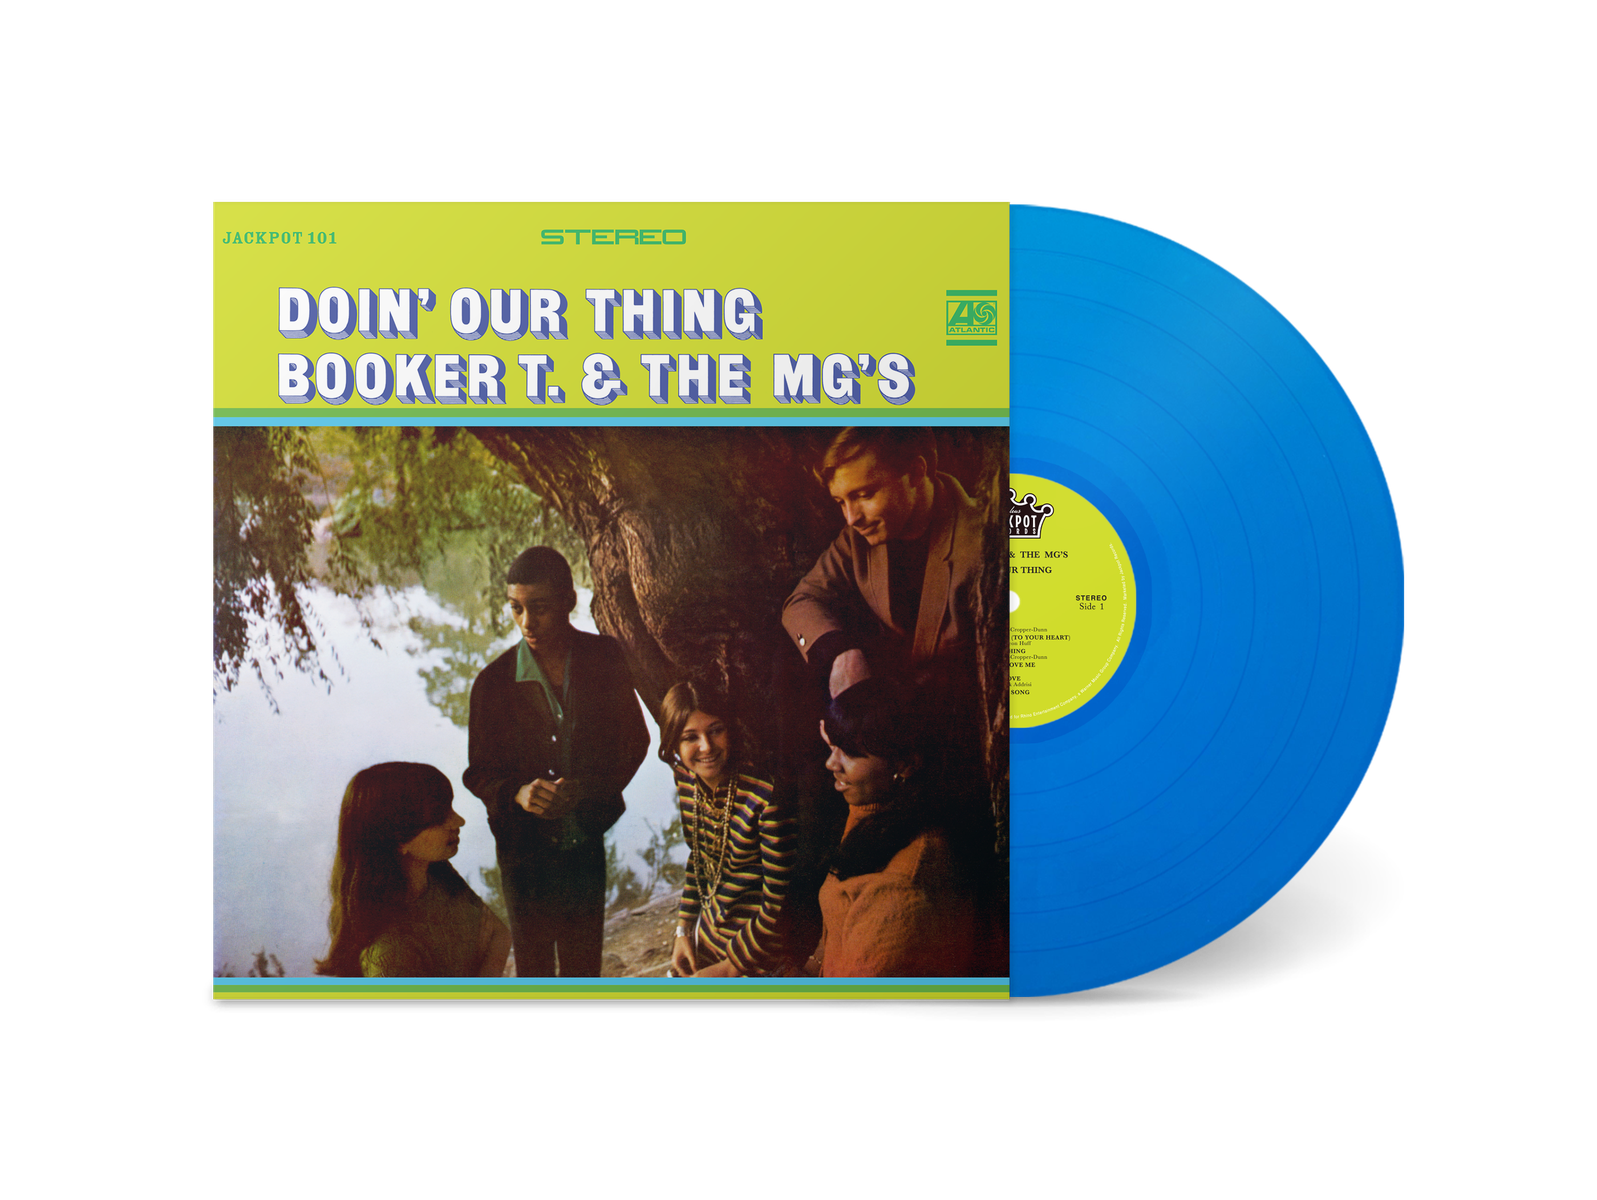 PRE-ORDER: Booker T & the MG's - Doin' Our Thing (Jackpot Exclusive Green/Yellow Swirl Vinyl - Limited to 500)